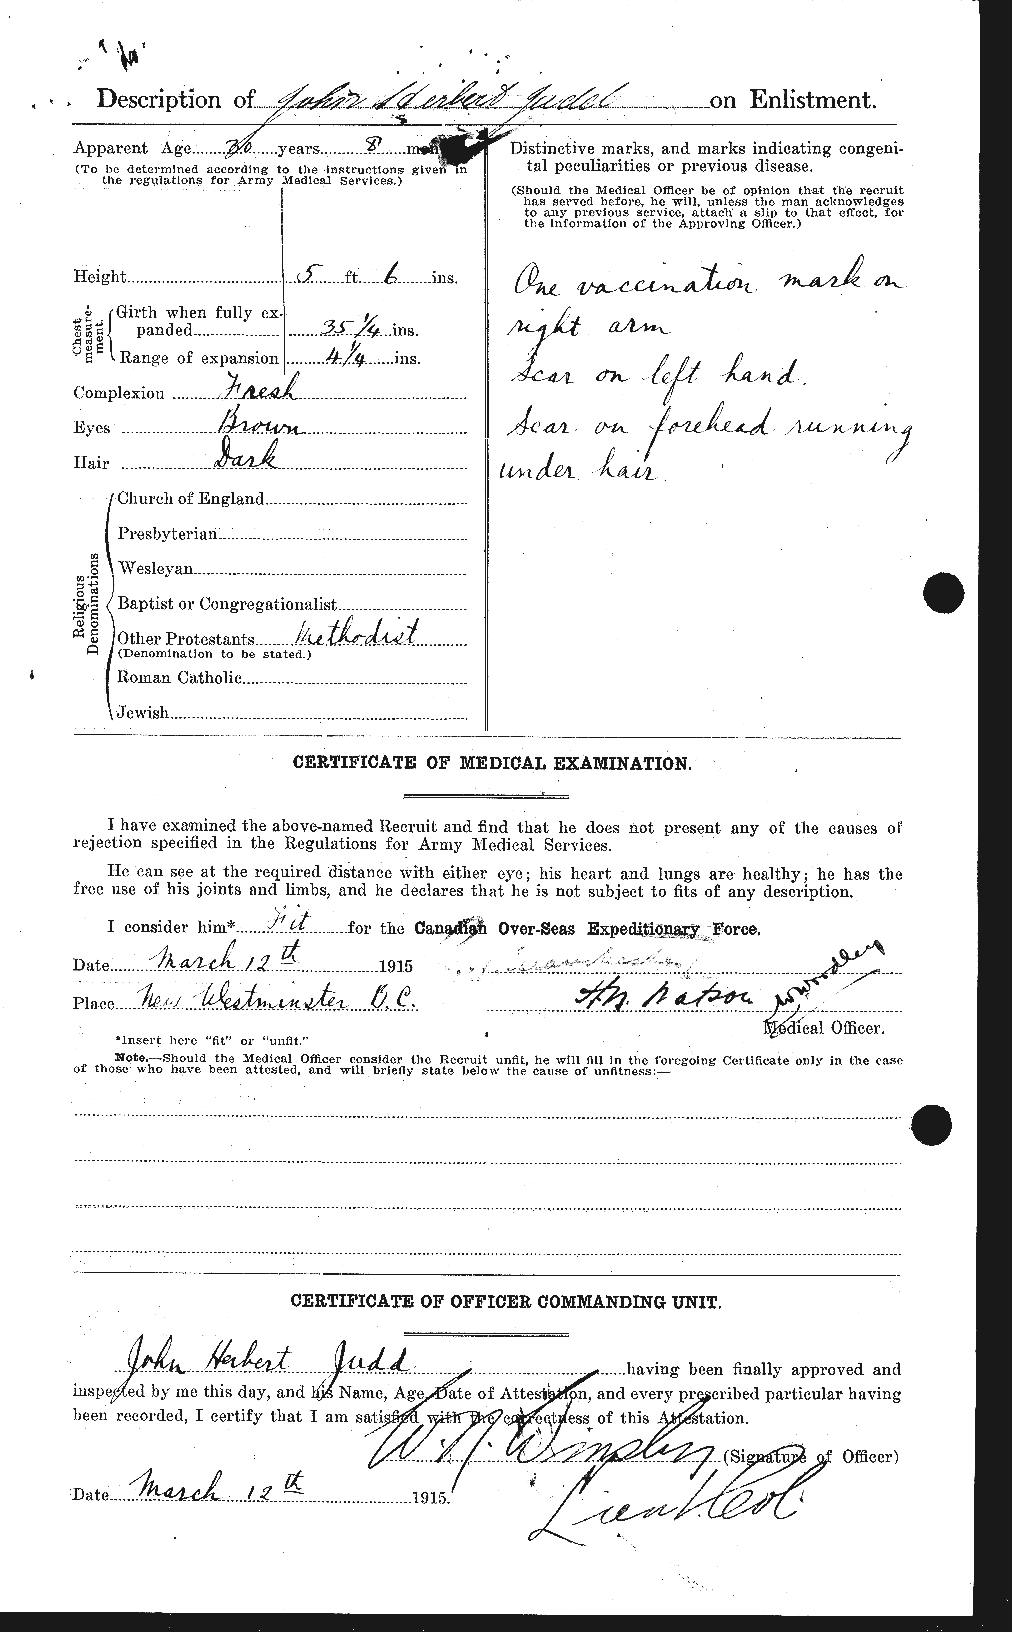 Personnel Records of the First World War - CEF 424205b